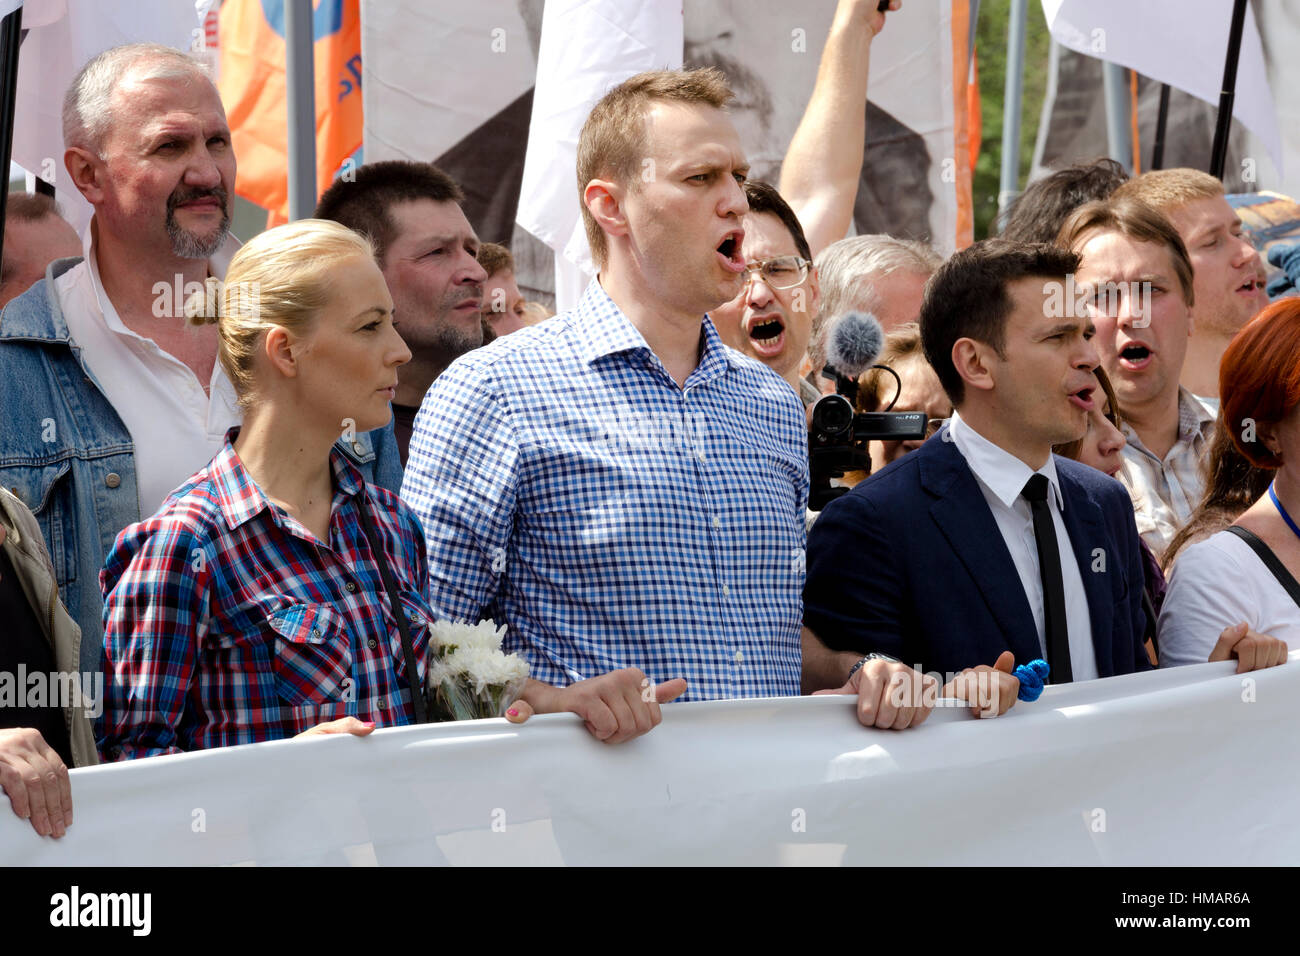 Russian opposition leader Alexei Navalny (center), his wife Yulia (L) and Ilya Yashin (R) at ropposition march through a street Stock Photo